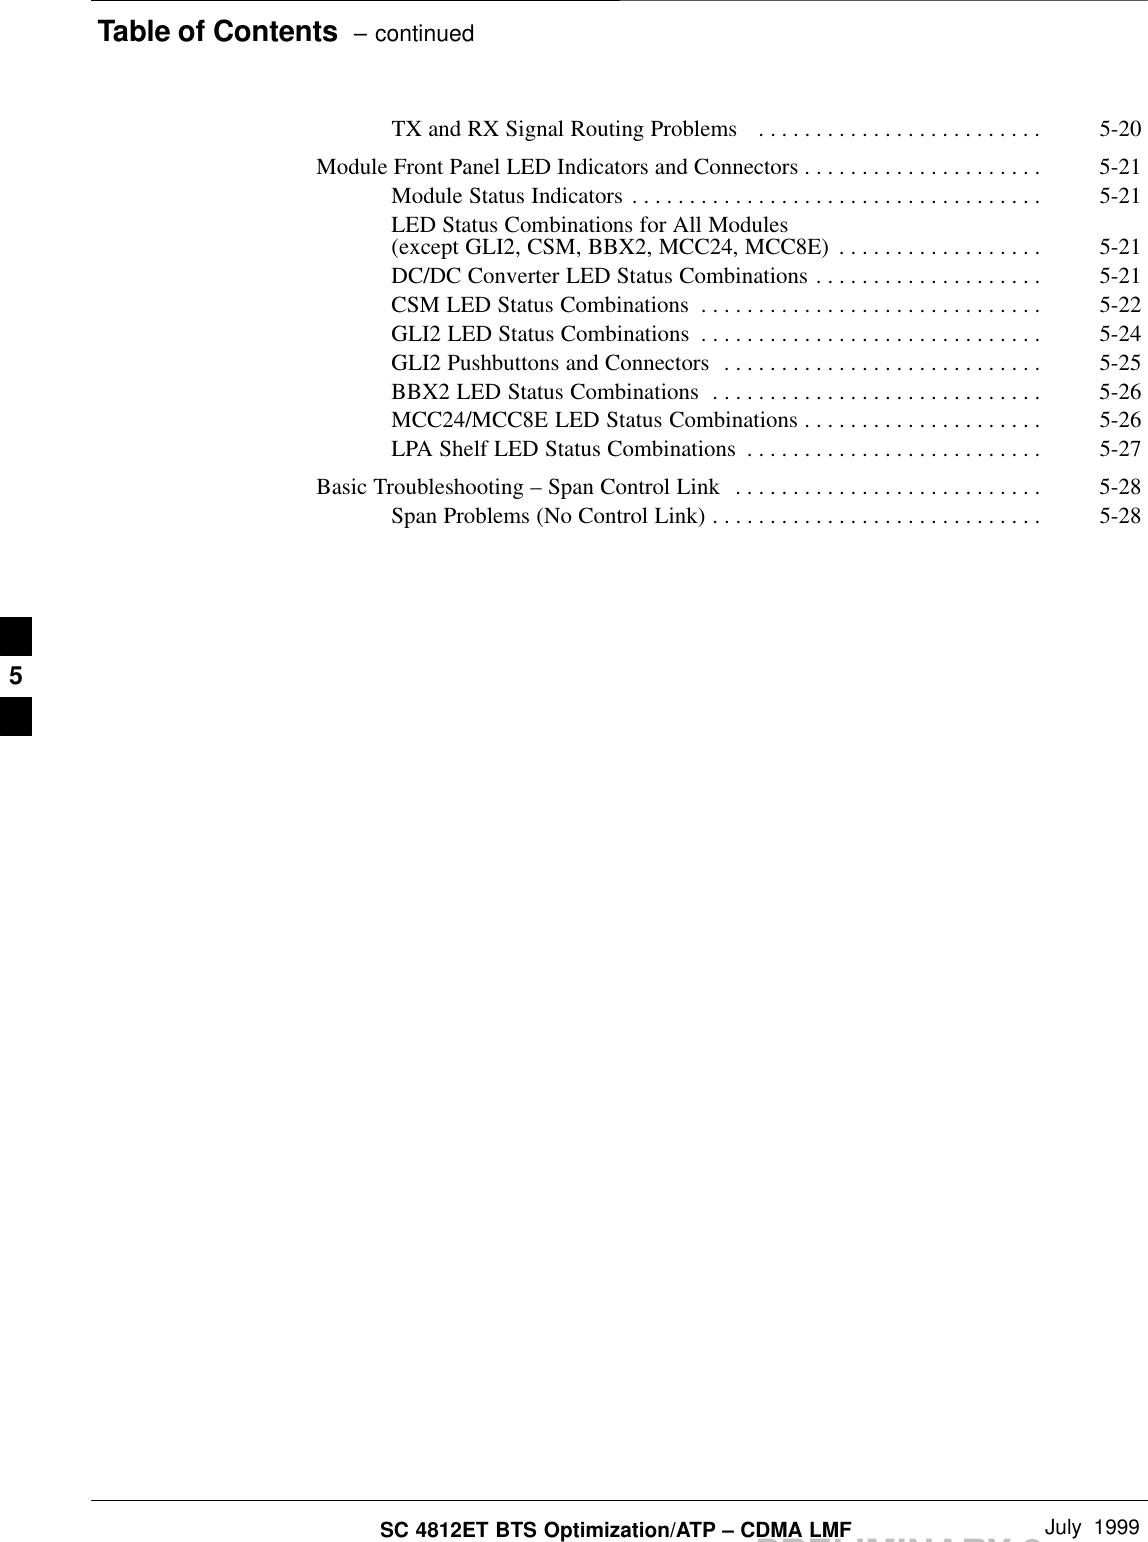 Table of Contents  – continuedPRELIMINARY 2SC 4812ET BTS Optimization/ATP – CDMA LMF July  1999TX and RX Signal Routing Problems  5-20. . . . . . . . . . . . . . . . . . . . . . . . . Module Front Panel LED Indicators and Connectors 5-21. . . . . . . . . . . . . . . . . . . . . Module Status Indicators 5-21. . . . . . . . . . . . . . . . . . . . . . . . . . . . . . . . . . . . LED Status Combinations for All Modules(except GLI2, CSM, BBX2, MCC24, MCC8E) 5-21. . . . . . . . . . . . . . . . . . DC/DC Converter LED Status Combinations 5-21. . . . . . . . . . . . . . . . . . . . CSM LED Status Combinations 5-22. . . . . . . . . . . . . . . . . . . . . . . . . . . . . . GLI2 LED Status Combinations 5-24. . . . . . . . . . . . . . . . . . . . . . . . . . . . . . GLI2 Pushbuttons and Connectors 5-25. . . . . . . . . . . . . . . . . . . . . . . . . . . . BBX2 LED Status Combinations 5-26. . . . . . . . . . . . . . . . . . . . . . . . . . . . . MCC24/MCC8E LED Status Combinations 5-26. . . . . . . . . . . . . . . . . . . . . LPA Shelf LED Status Combinations 5-27. . . . . . . . . . . . . . . . . . . . . . . . . . Basic Troubleshooting – Span Control Link 5-28. . . . . . . . . . . . . . . . . . . . . . . . . . . Span Problems (No Control Link) 5-28. . . . . . . . . . . . . . . . . . . . . . . . . . . . . 5